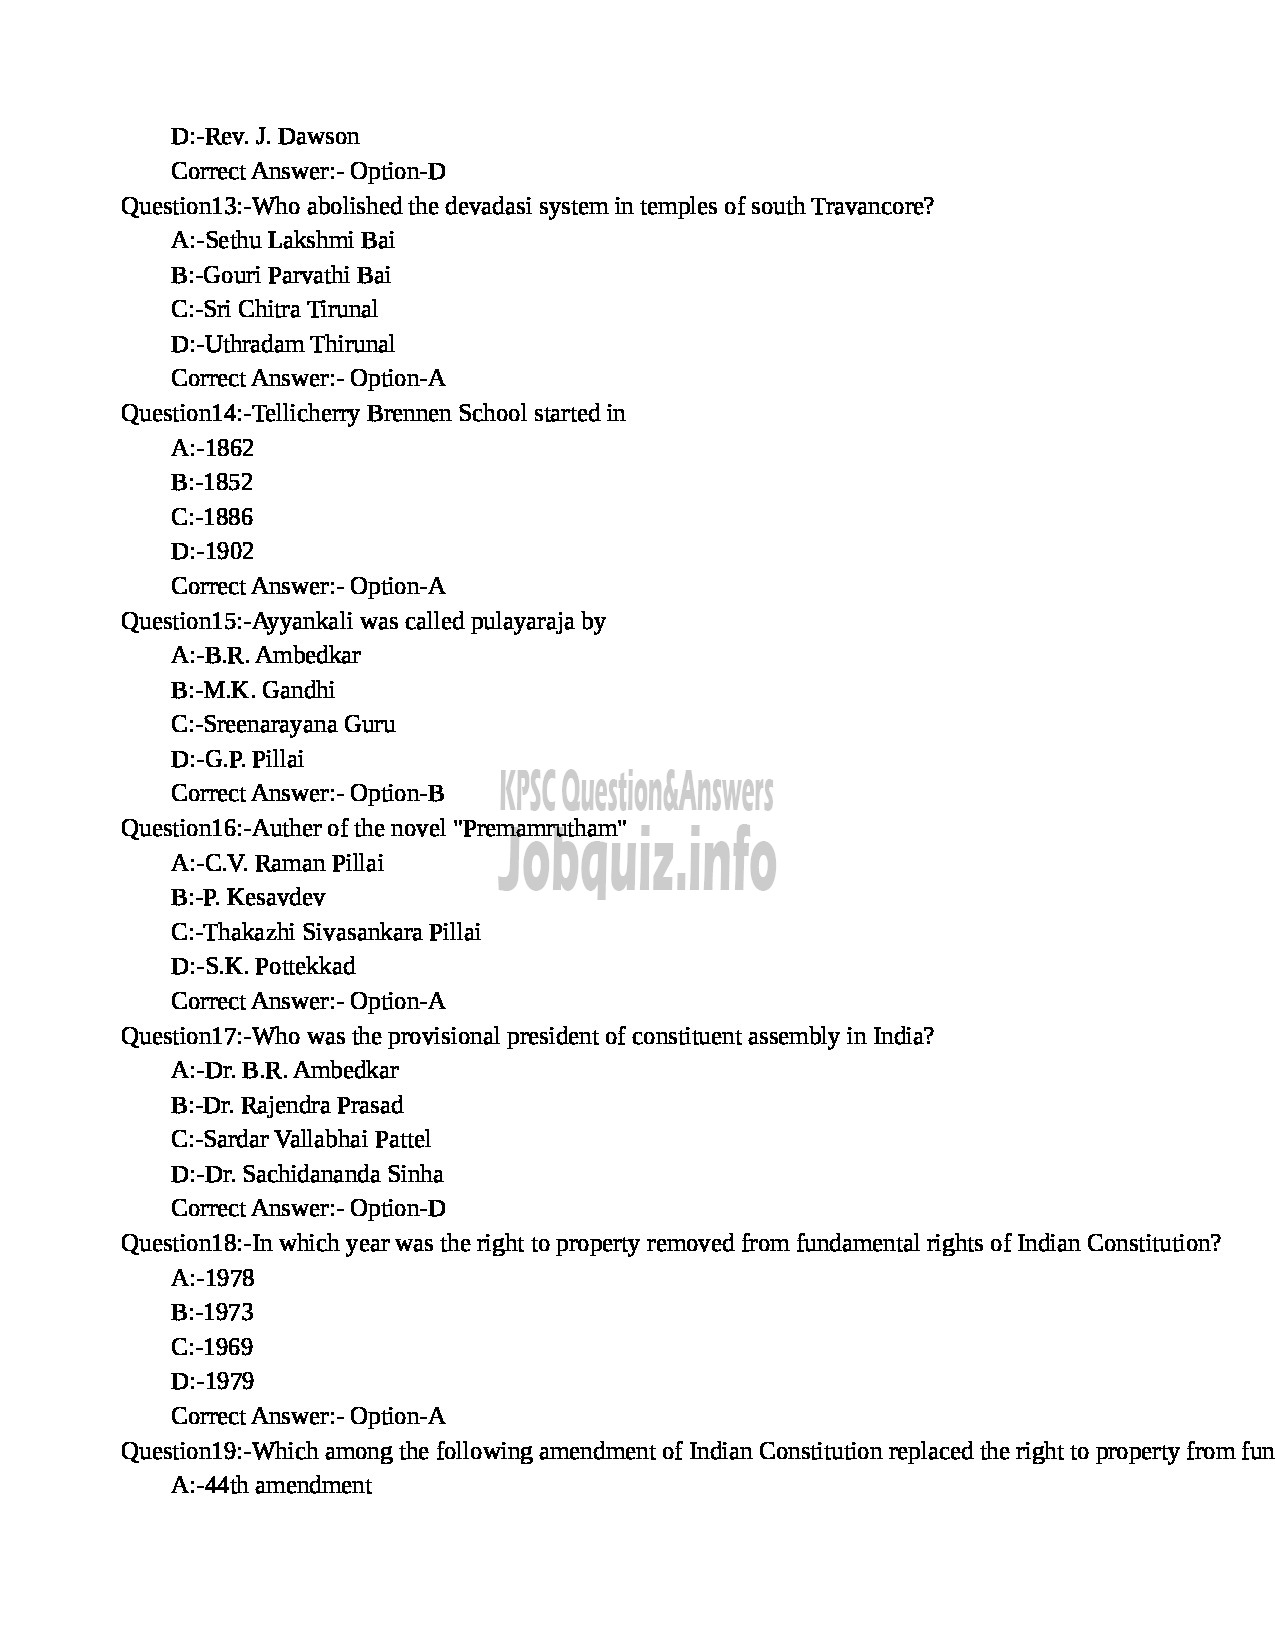 Kerala PSC Question Paper - Assistant Professor in physiology Medical Education-3